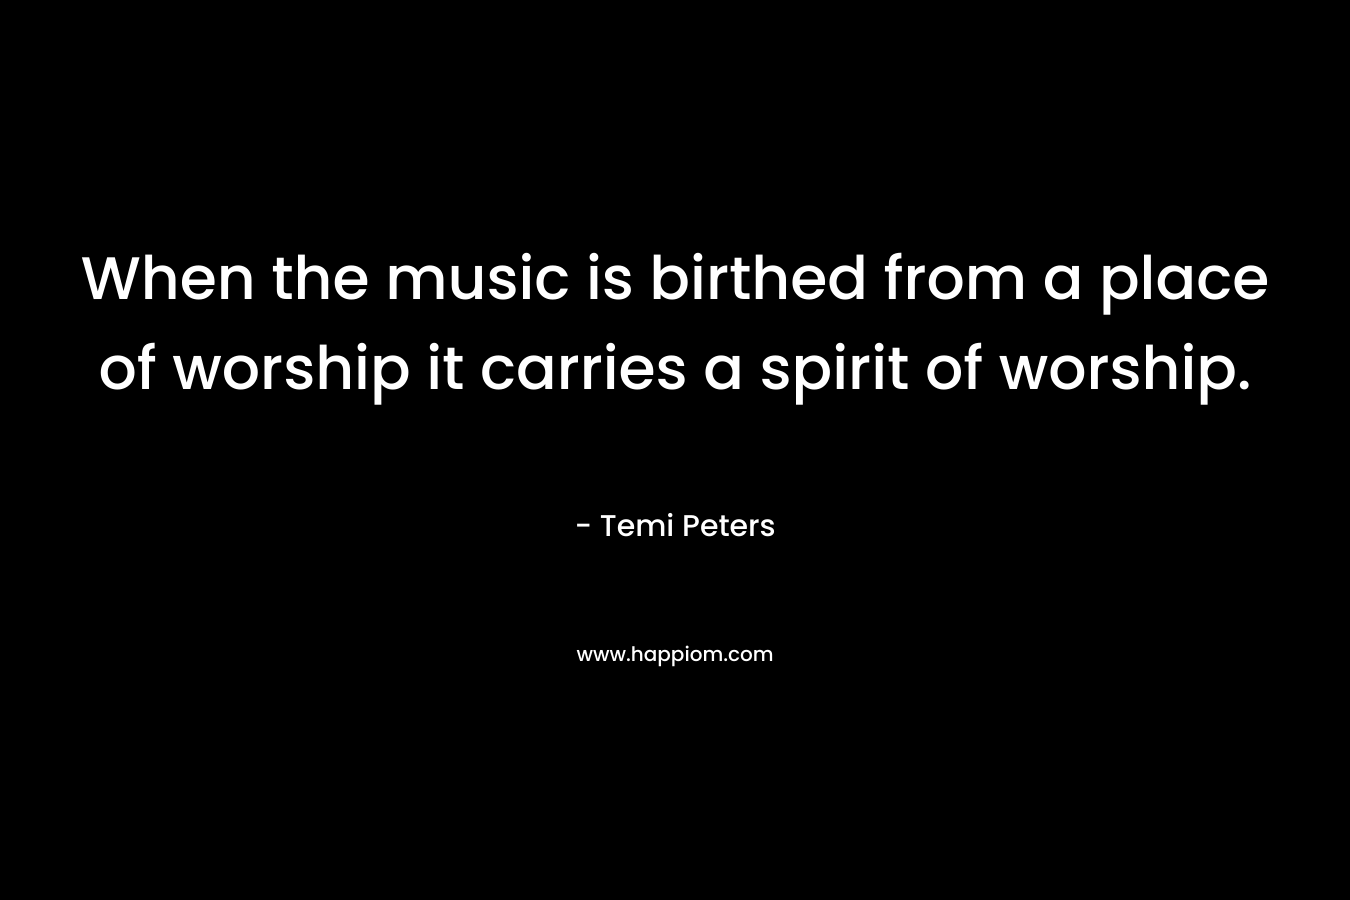 When the music is birthed from a place of worship it carries a spirit of worship.